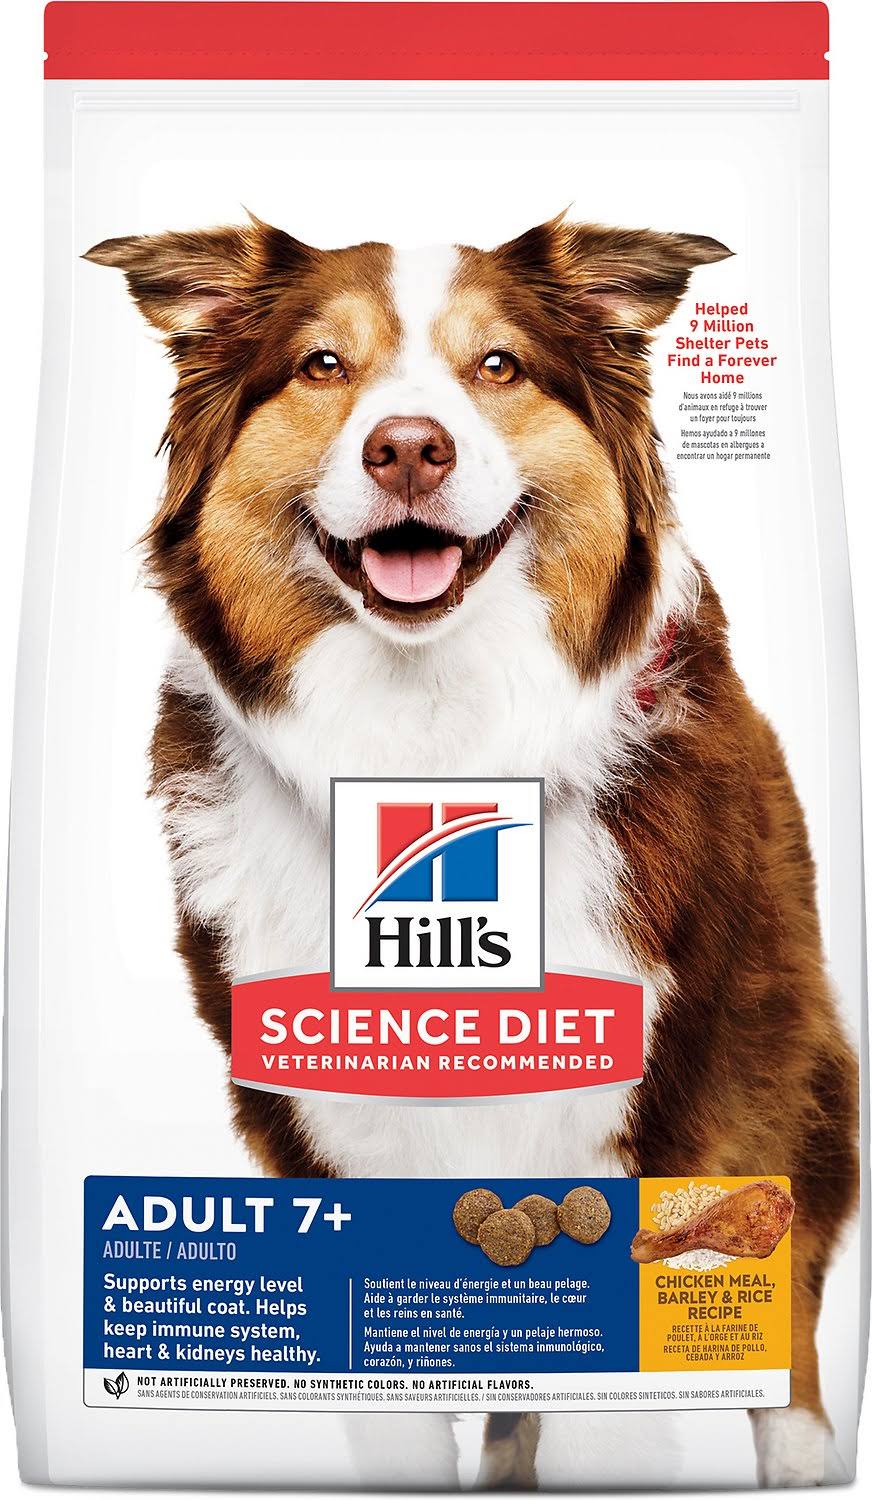 Hill's Science Diet Adult Active Longevity Chicken Meal Rice and Barley Recipe Dog Food - 5lb